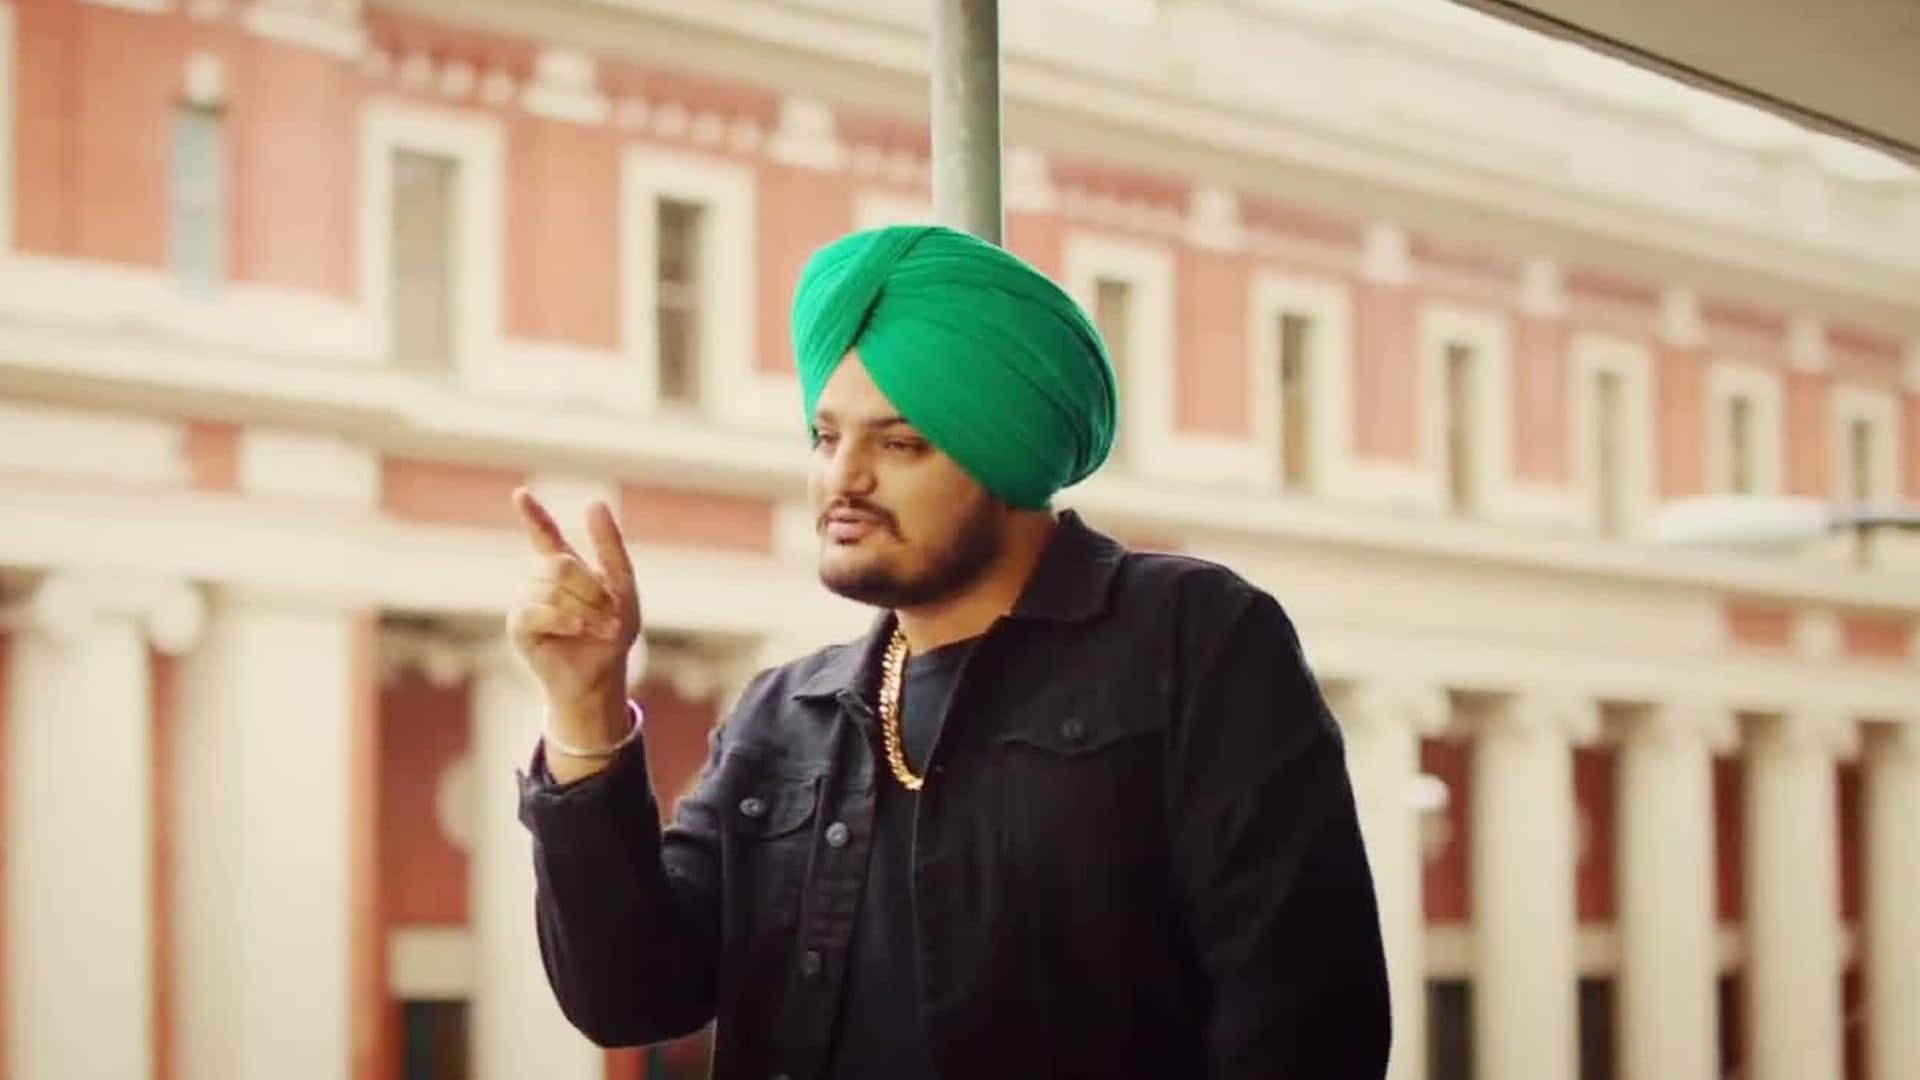 A Man In A Green Turban Is Pointing At A Building